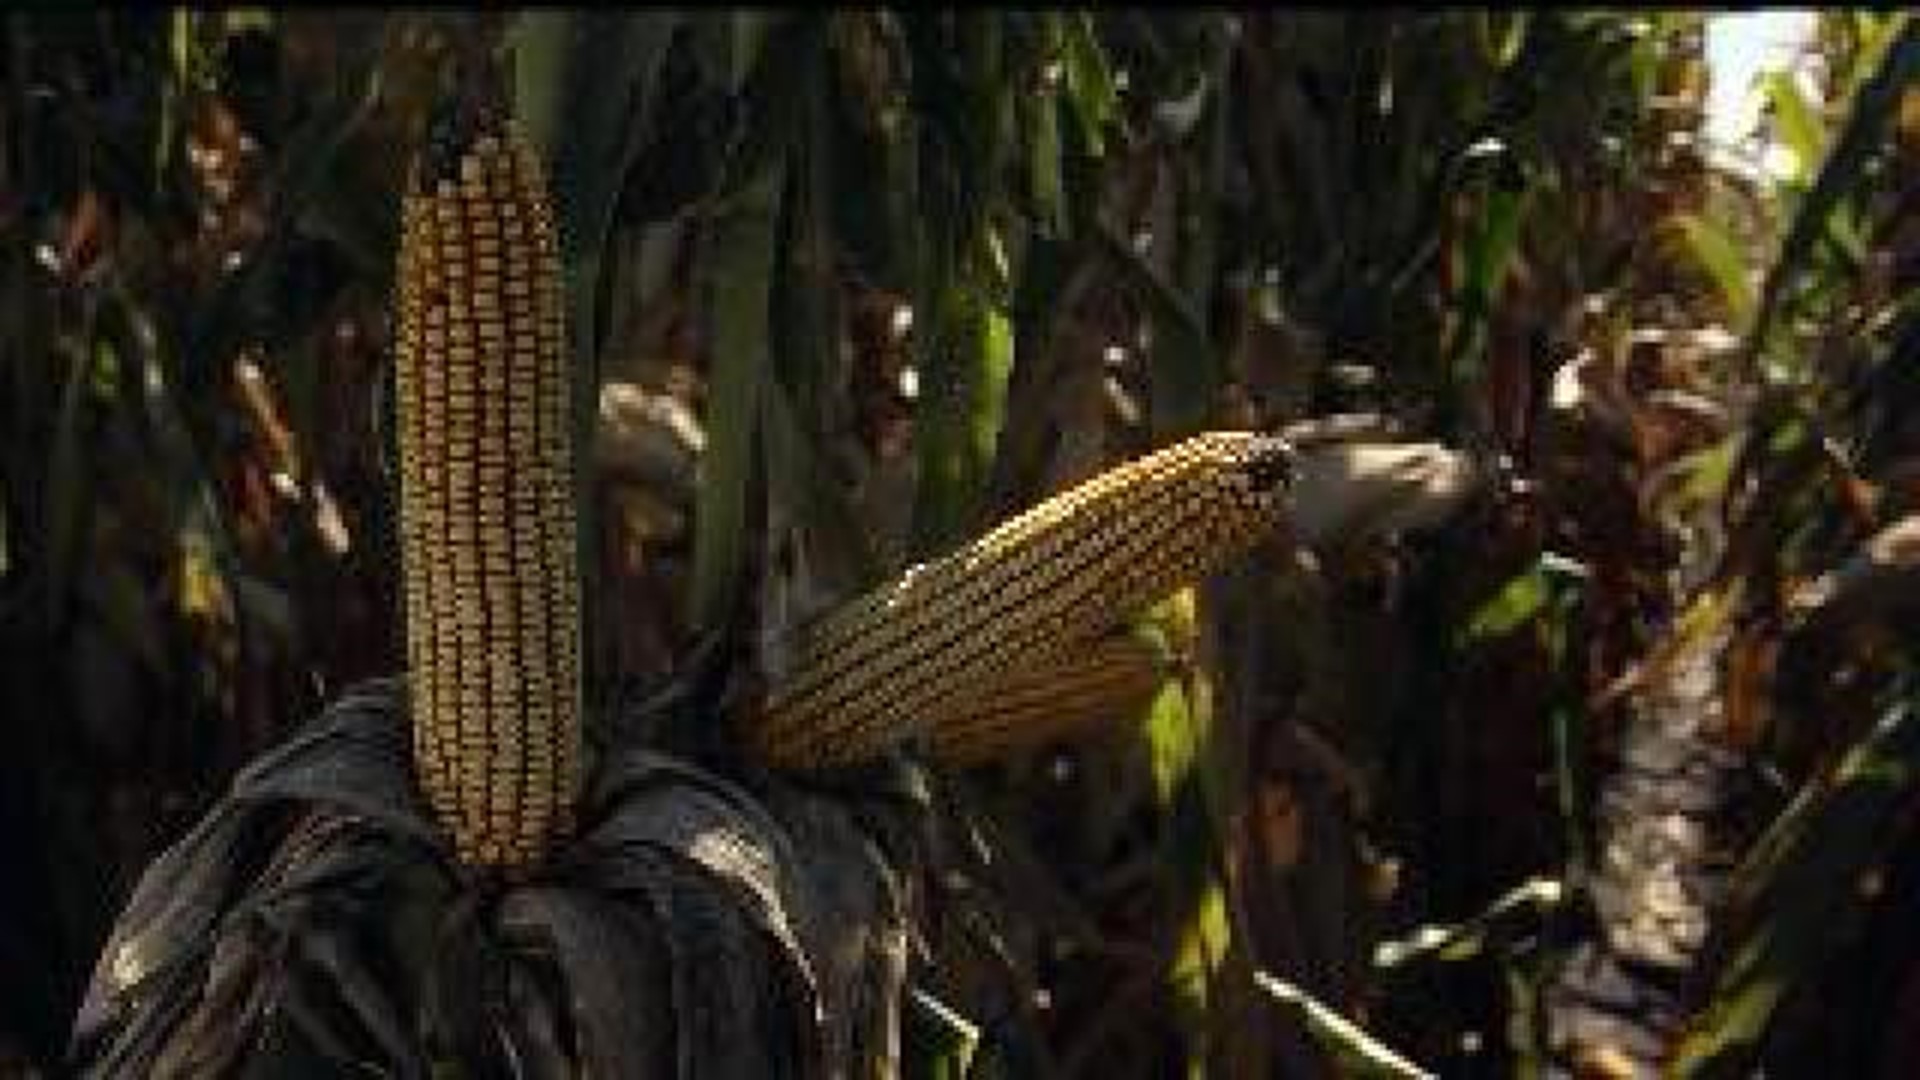 More indictments as conspiracy to steal corn-seed secrets expands